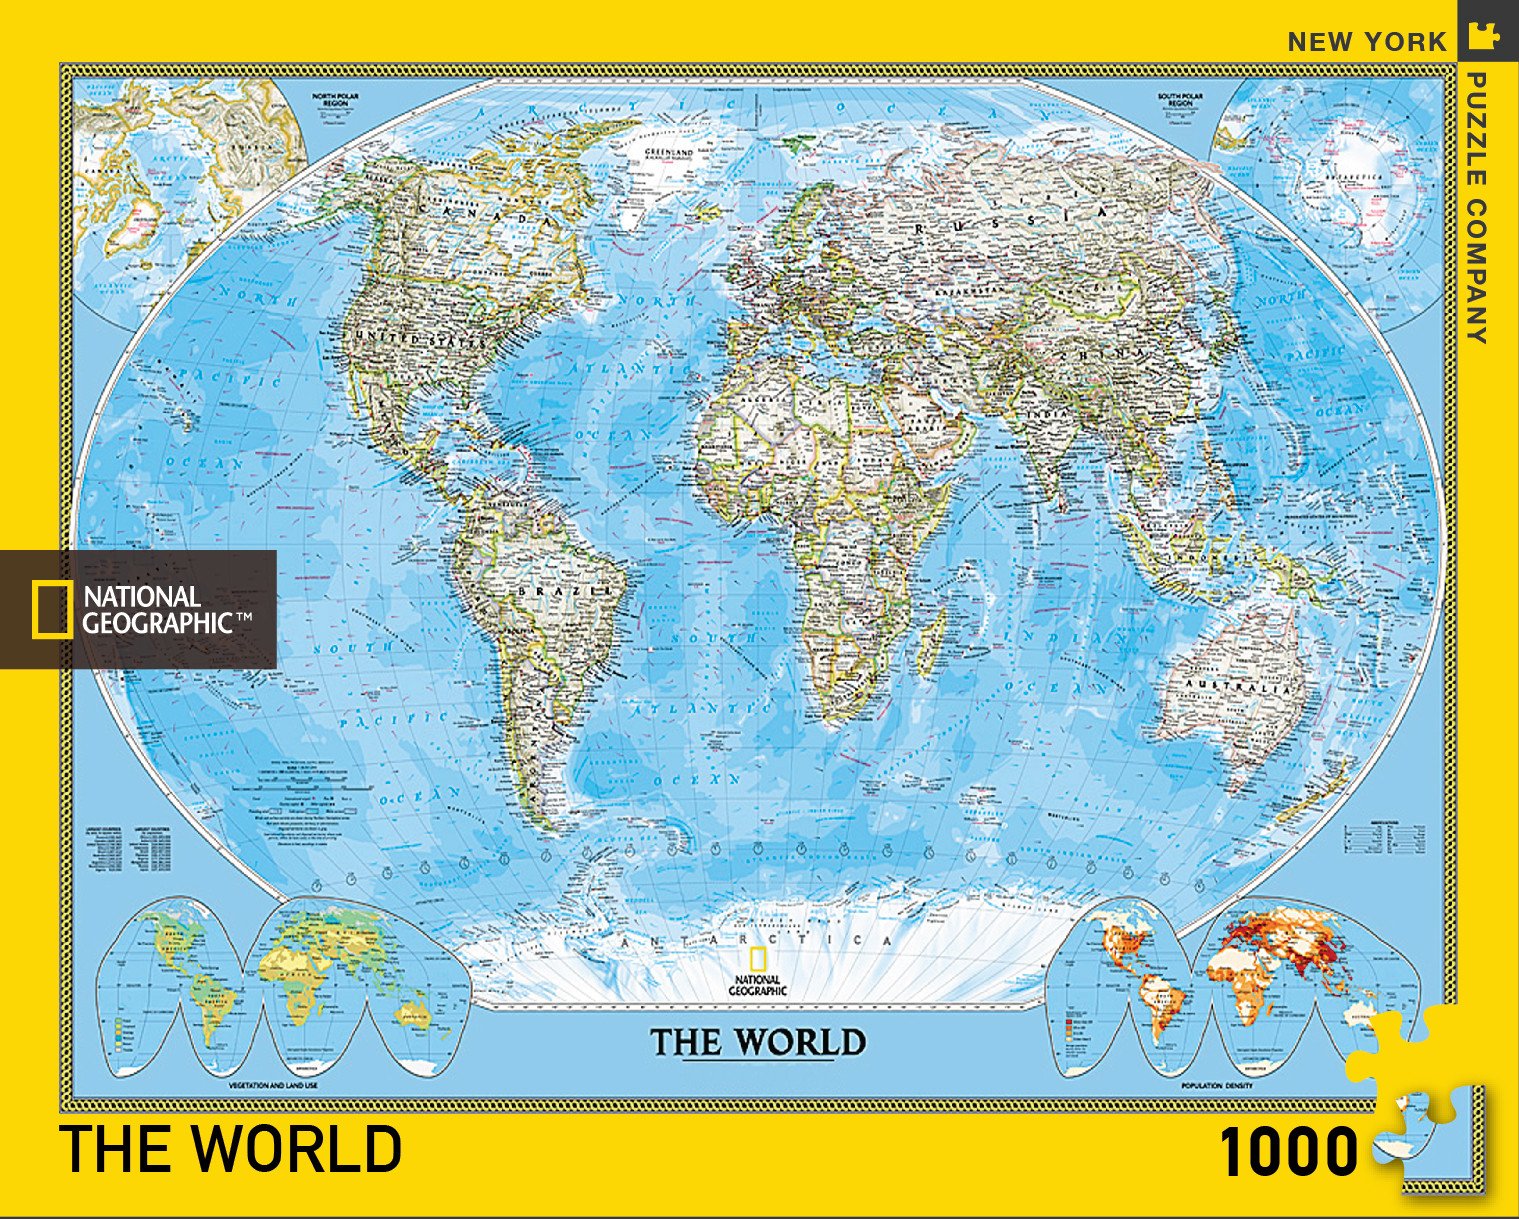 The World (1000 pc puzzle)